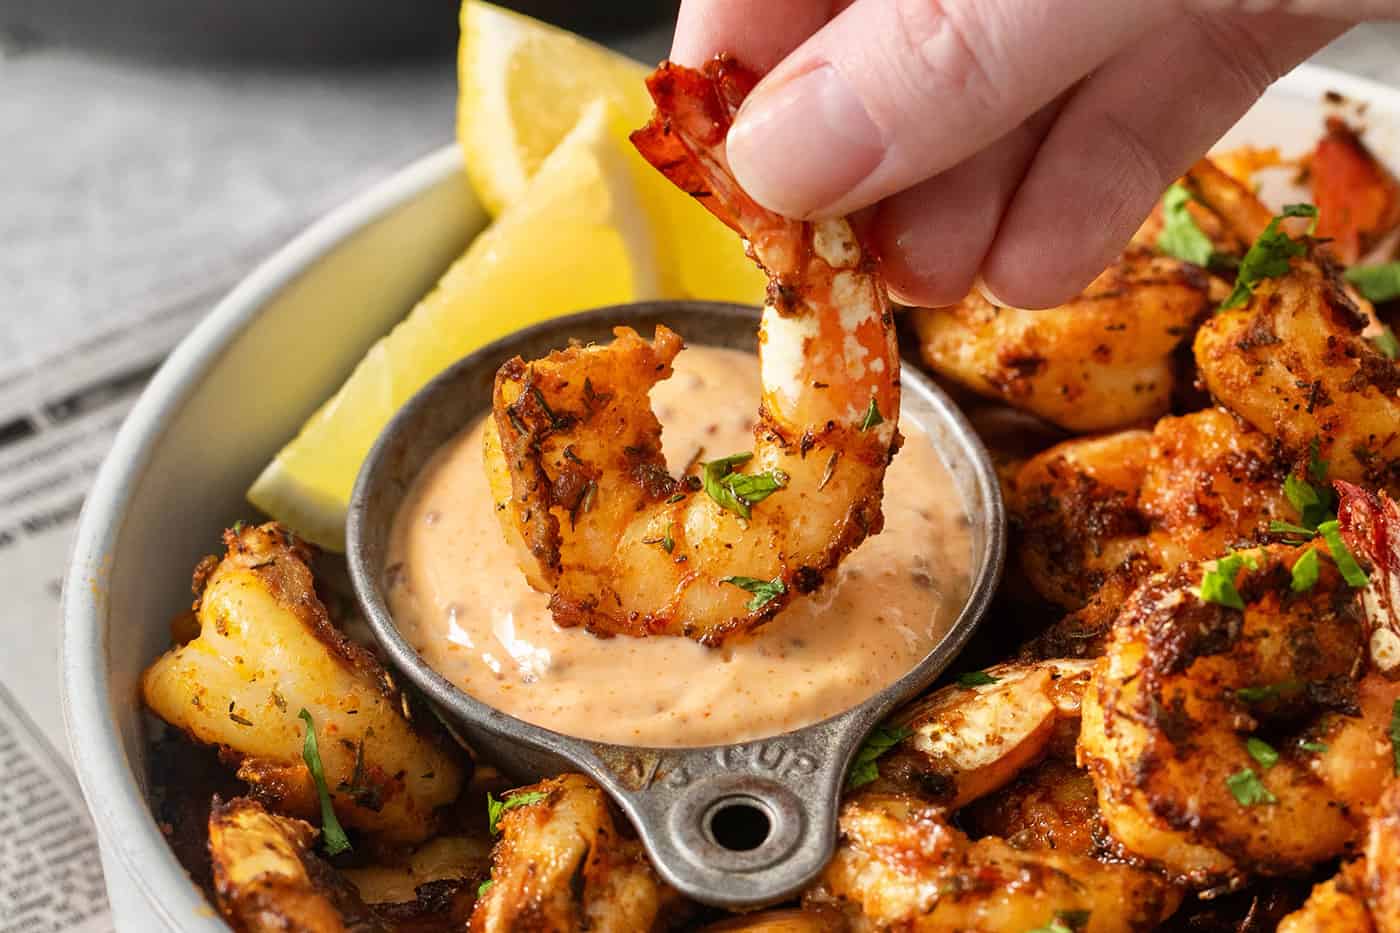 A hand dips a piece of blackened shrimp into a bowl of sauce.